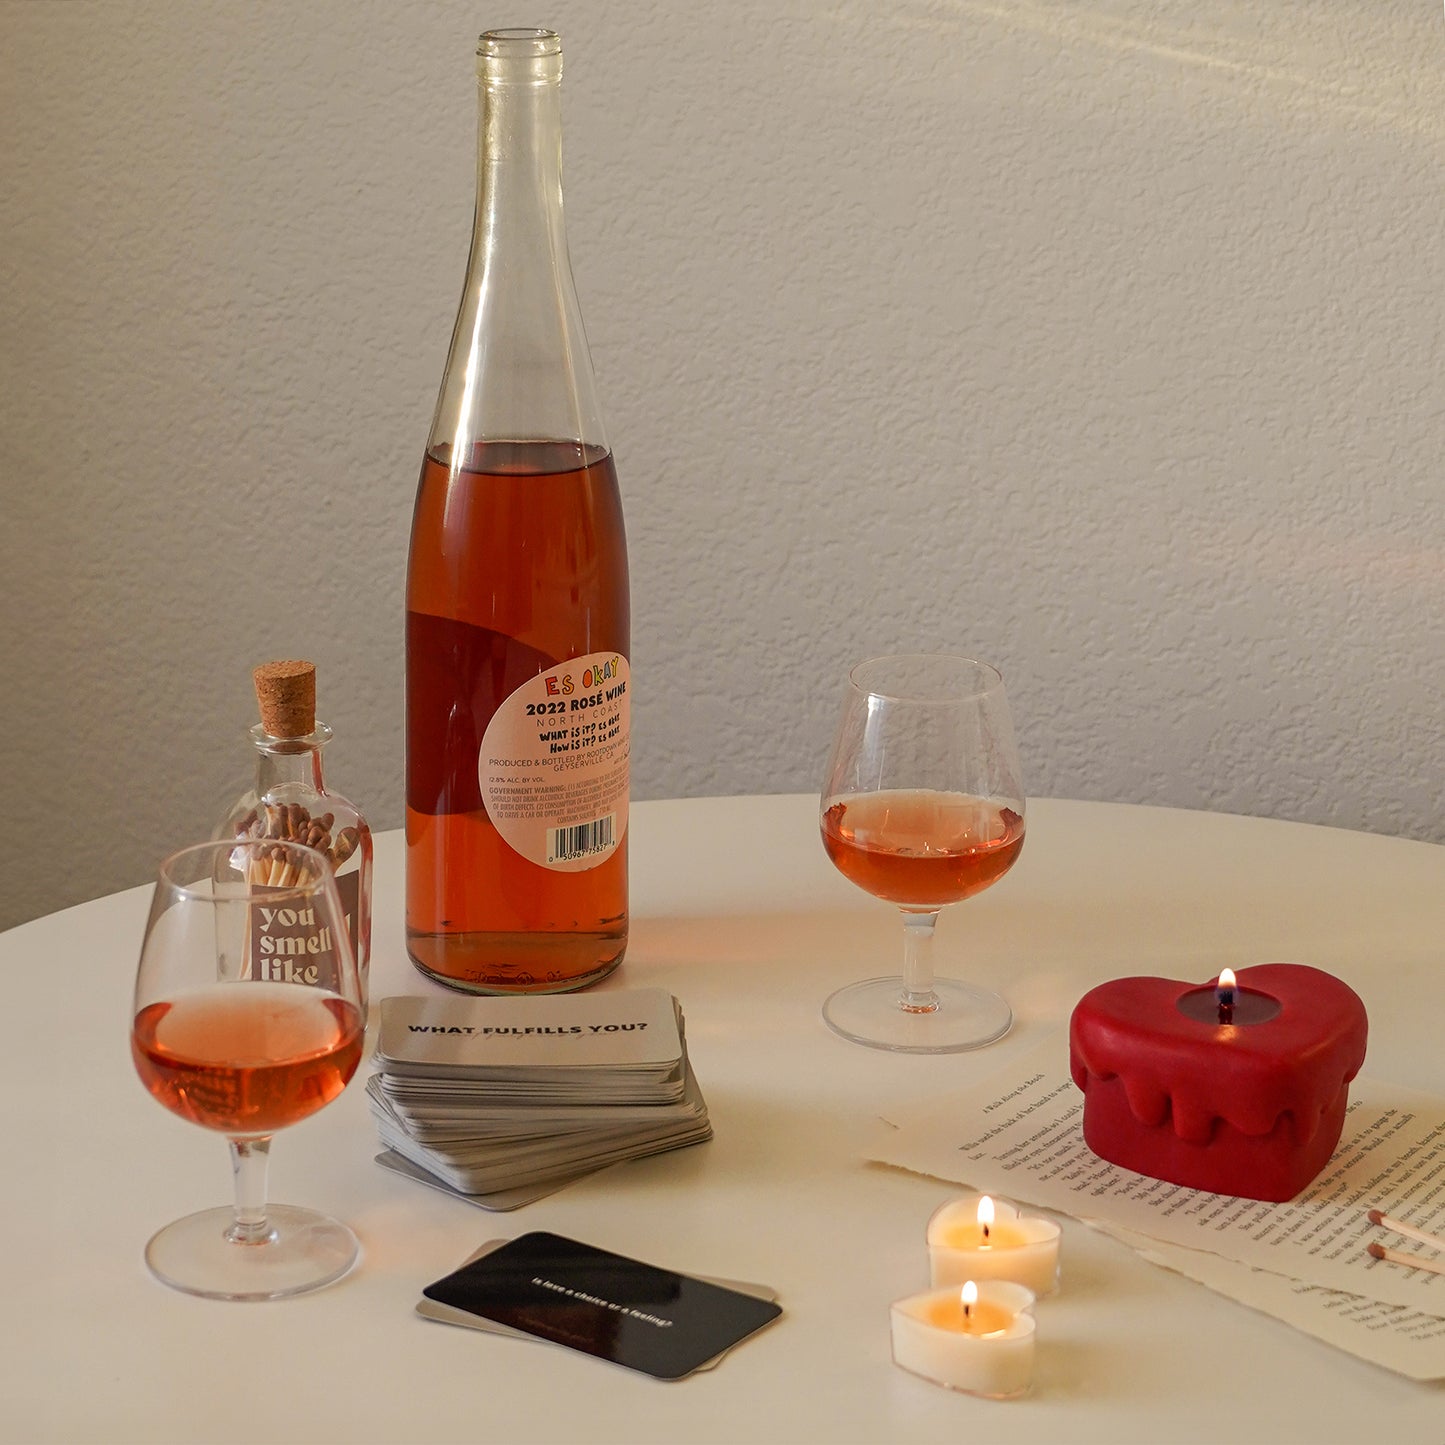 red melting heart candle and matches on book pages, a glass of rose wine, a bottle of rose and card on the white round table